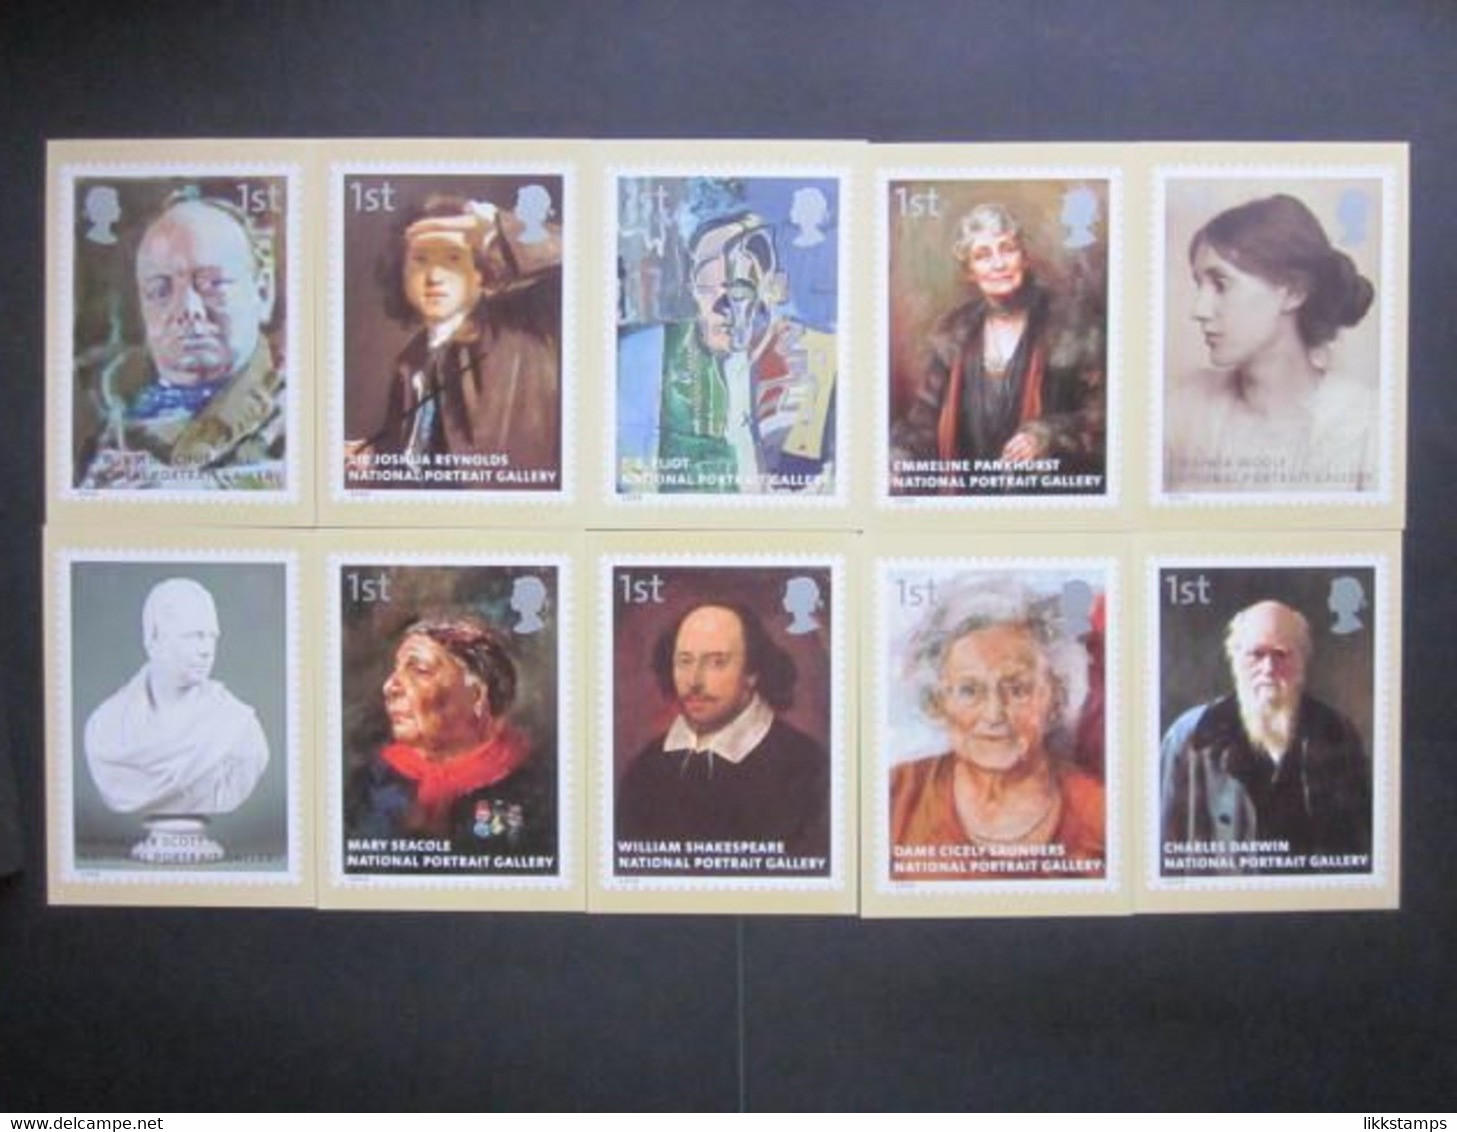 2006 THE NATIONAL PORTRAIT GALLERY, LONDON P.H.Q. CARDS UNUSED, ISSUE No. 289 (B) #00742 - Tarjetas PHQ